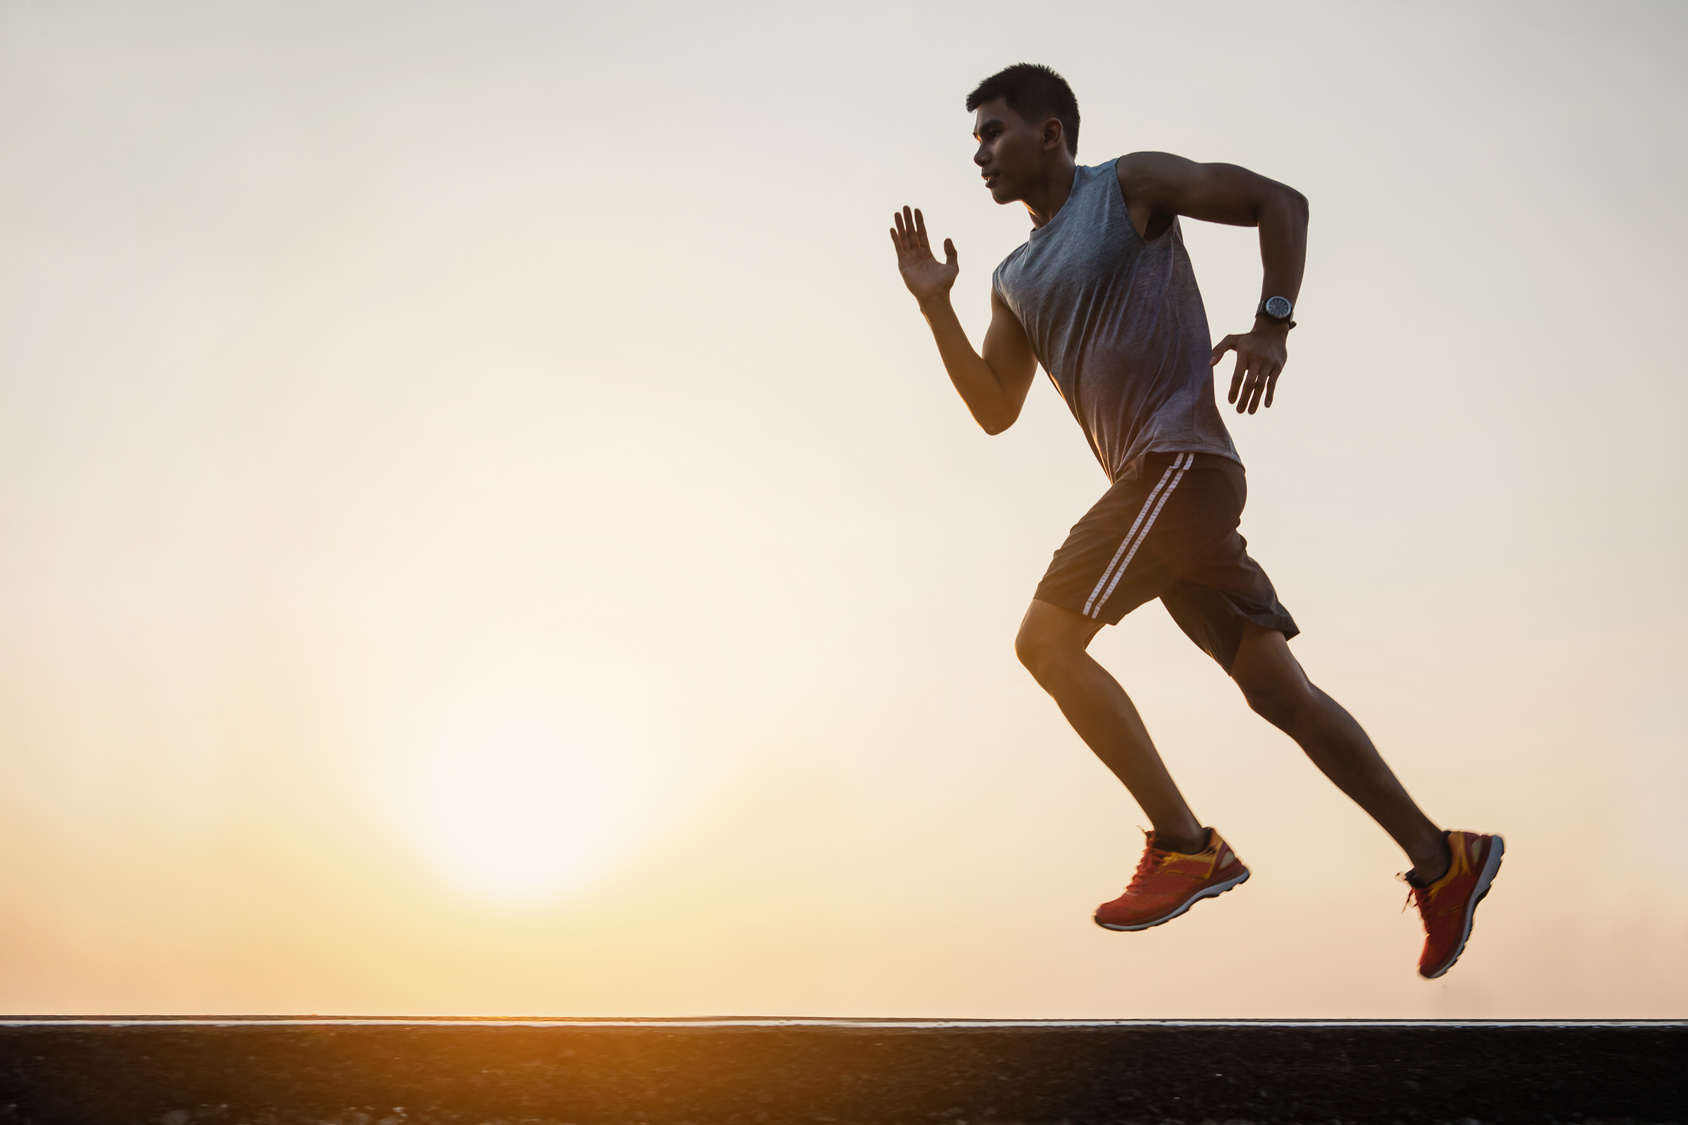 Running Faster: 4 Tips to Boost Your Speed Training